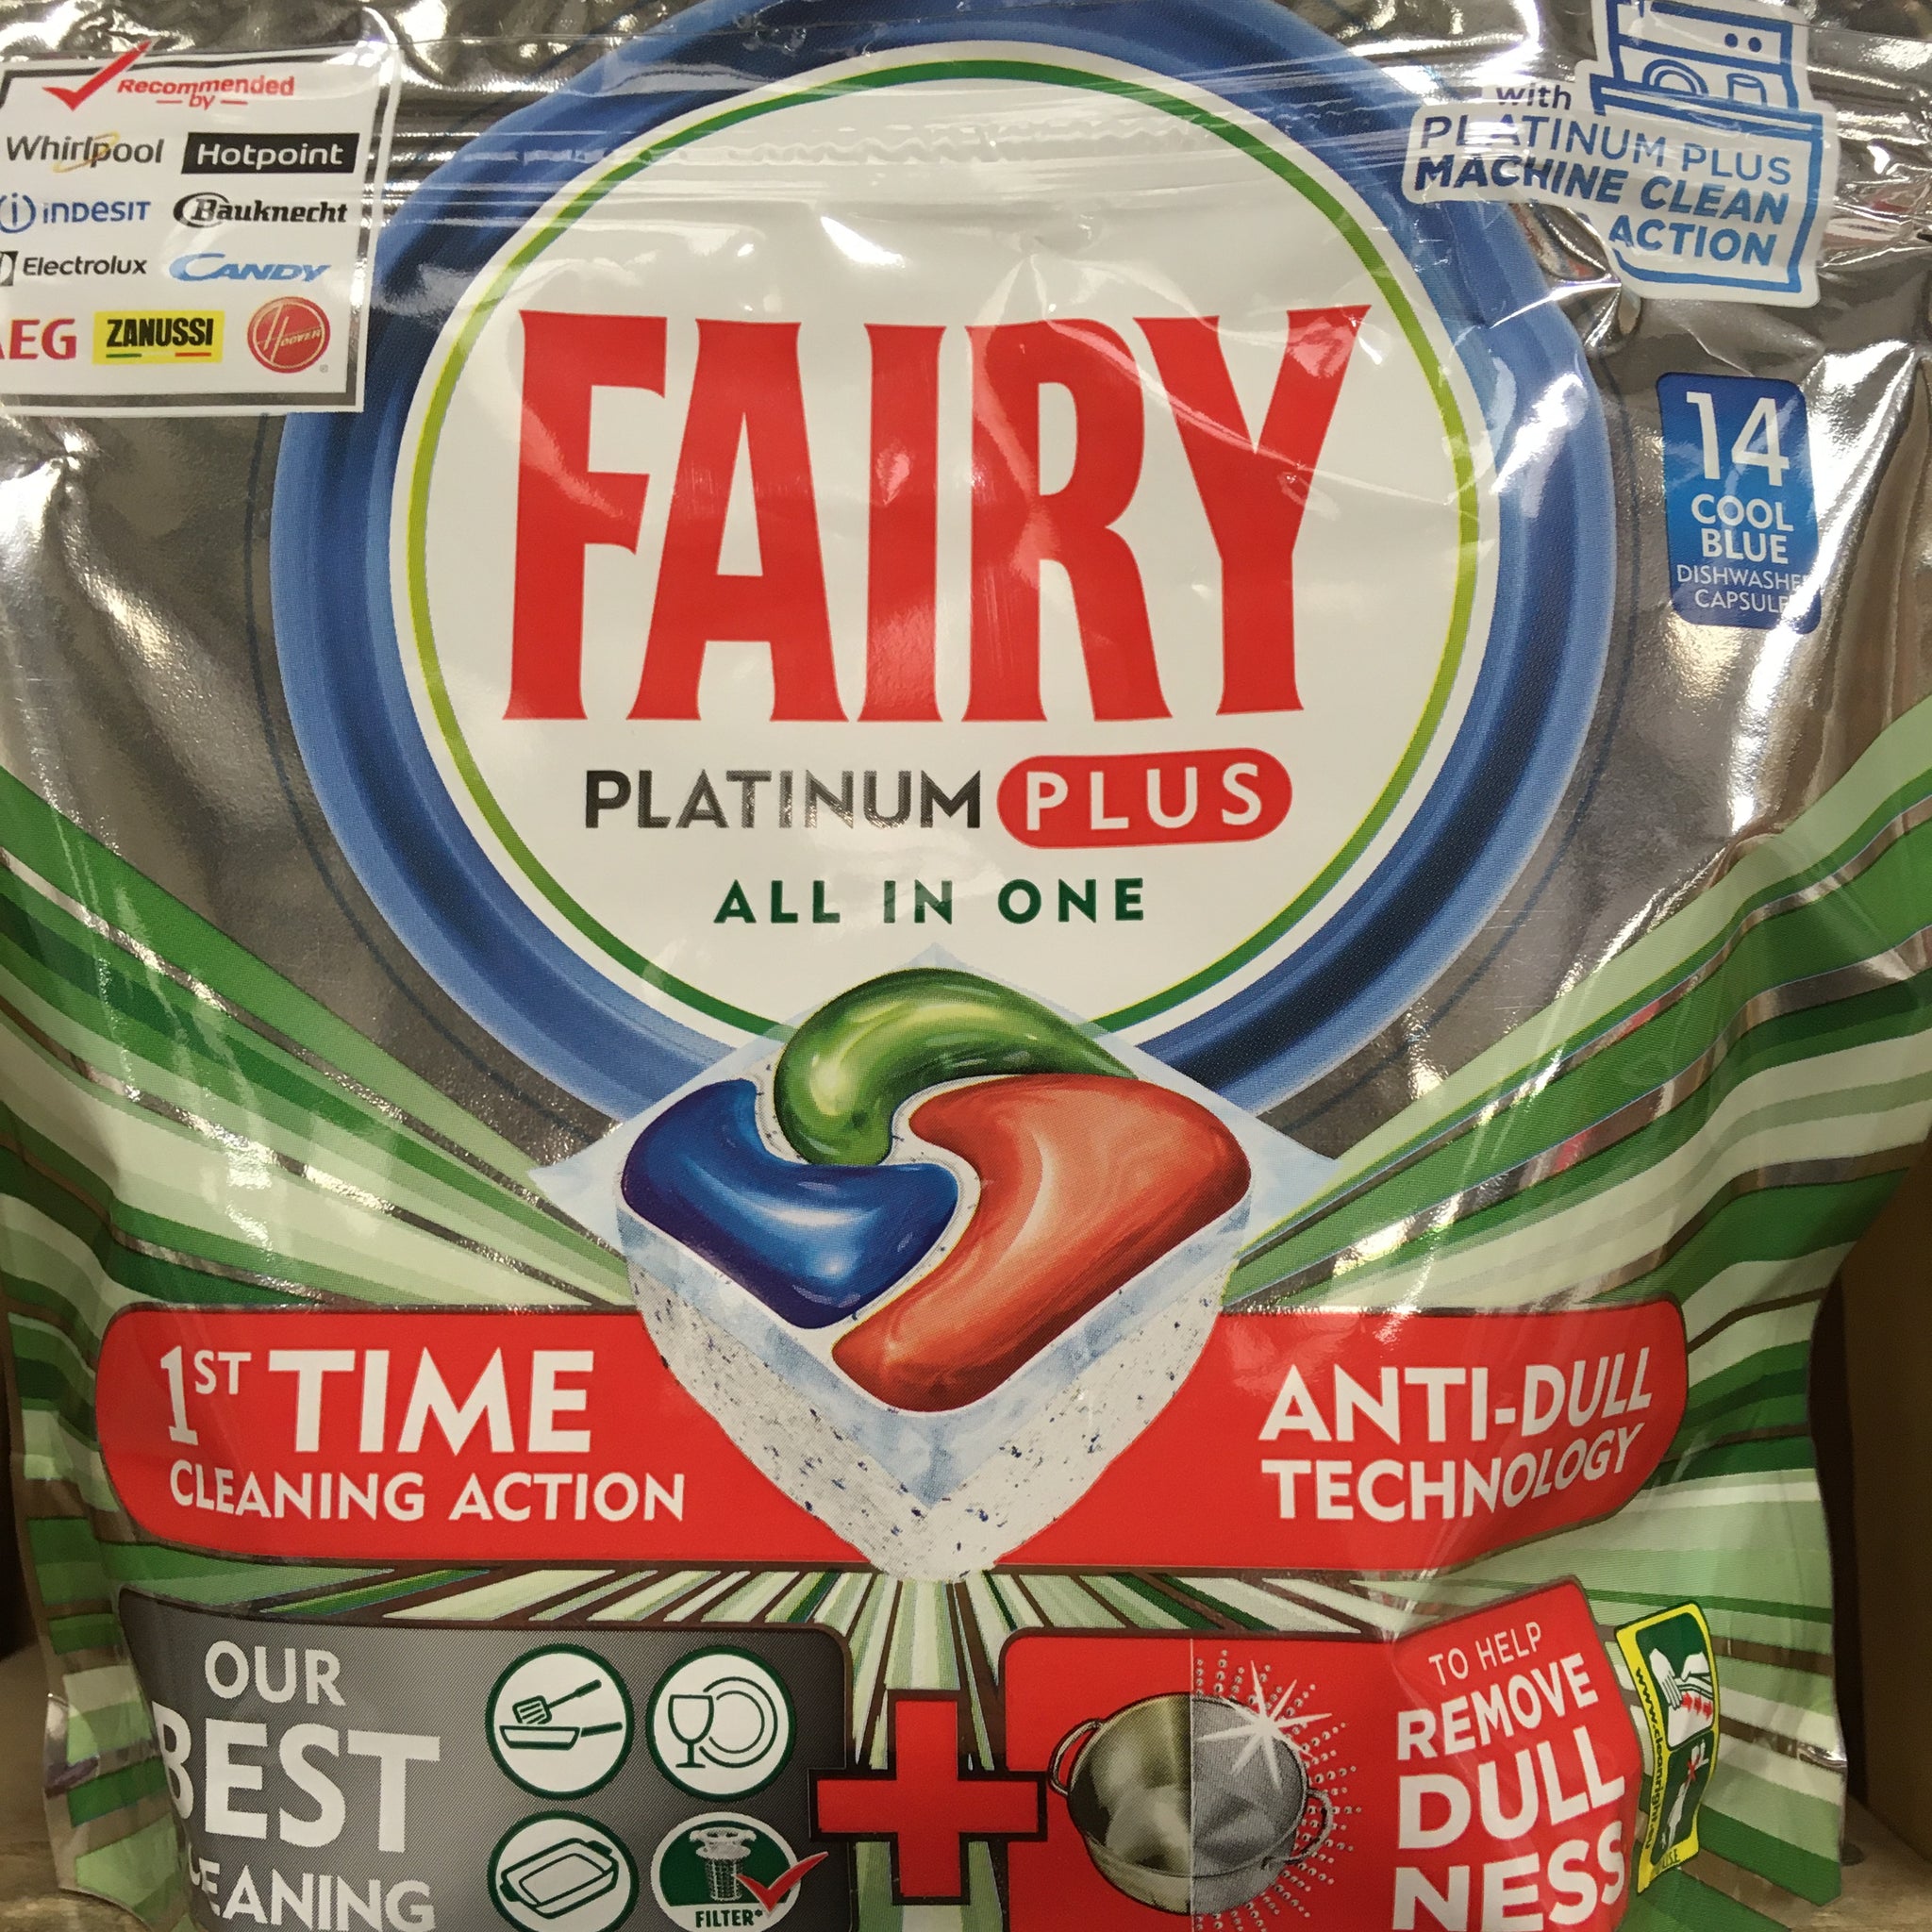 Can Fairy Platinum Plus dishwasher tabs do the job in short cycles? 